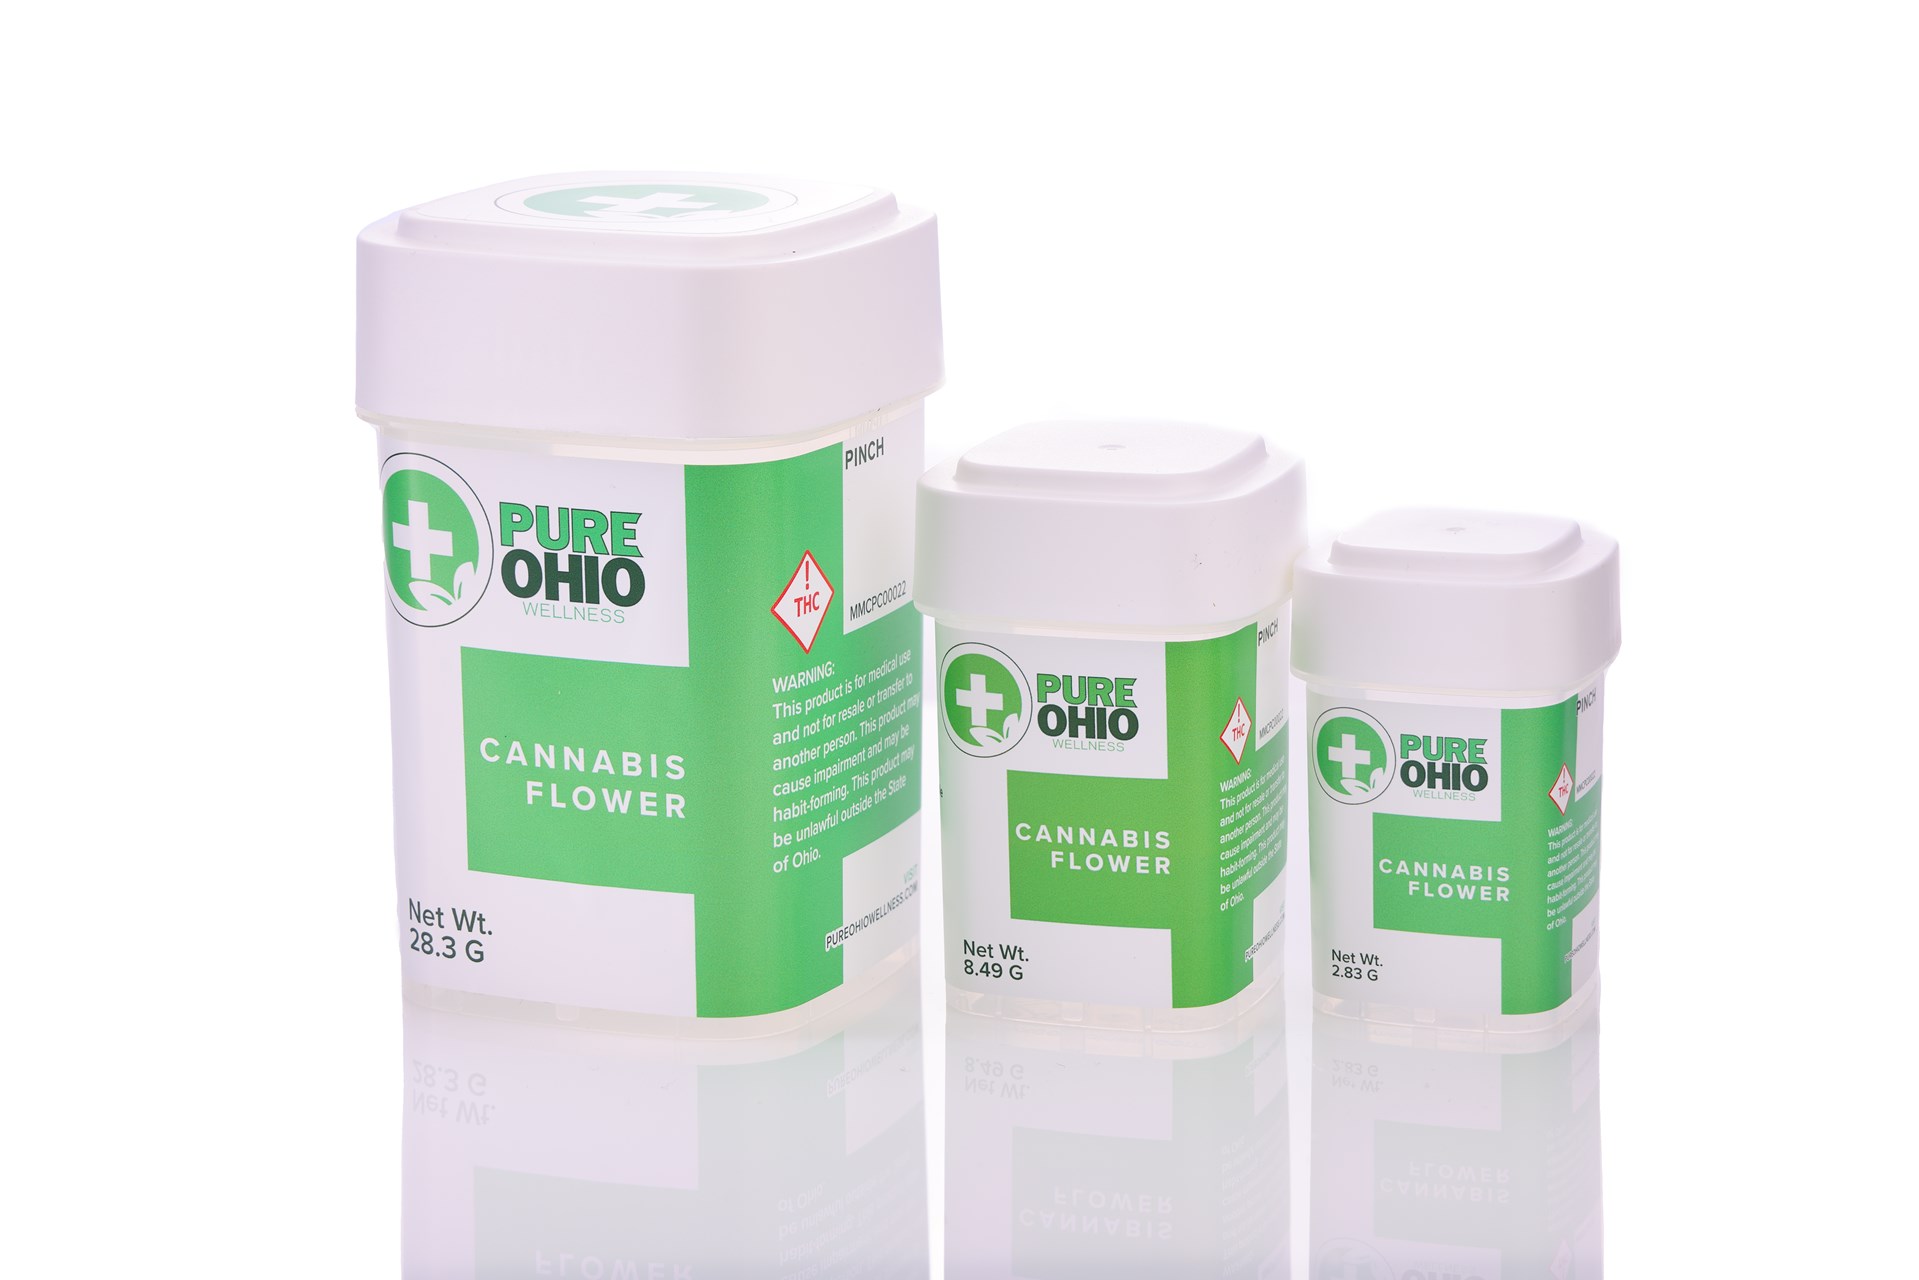 Line up of different sized Calyx drams with Pure Ohio Wellness branding